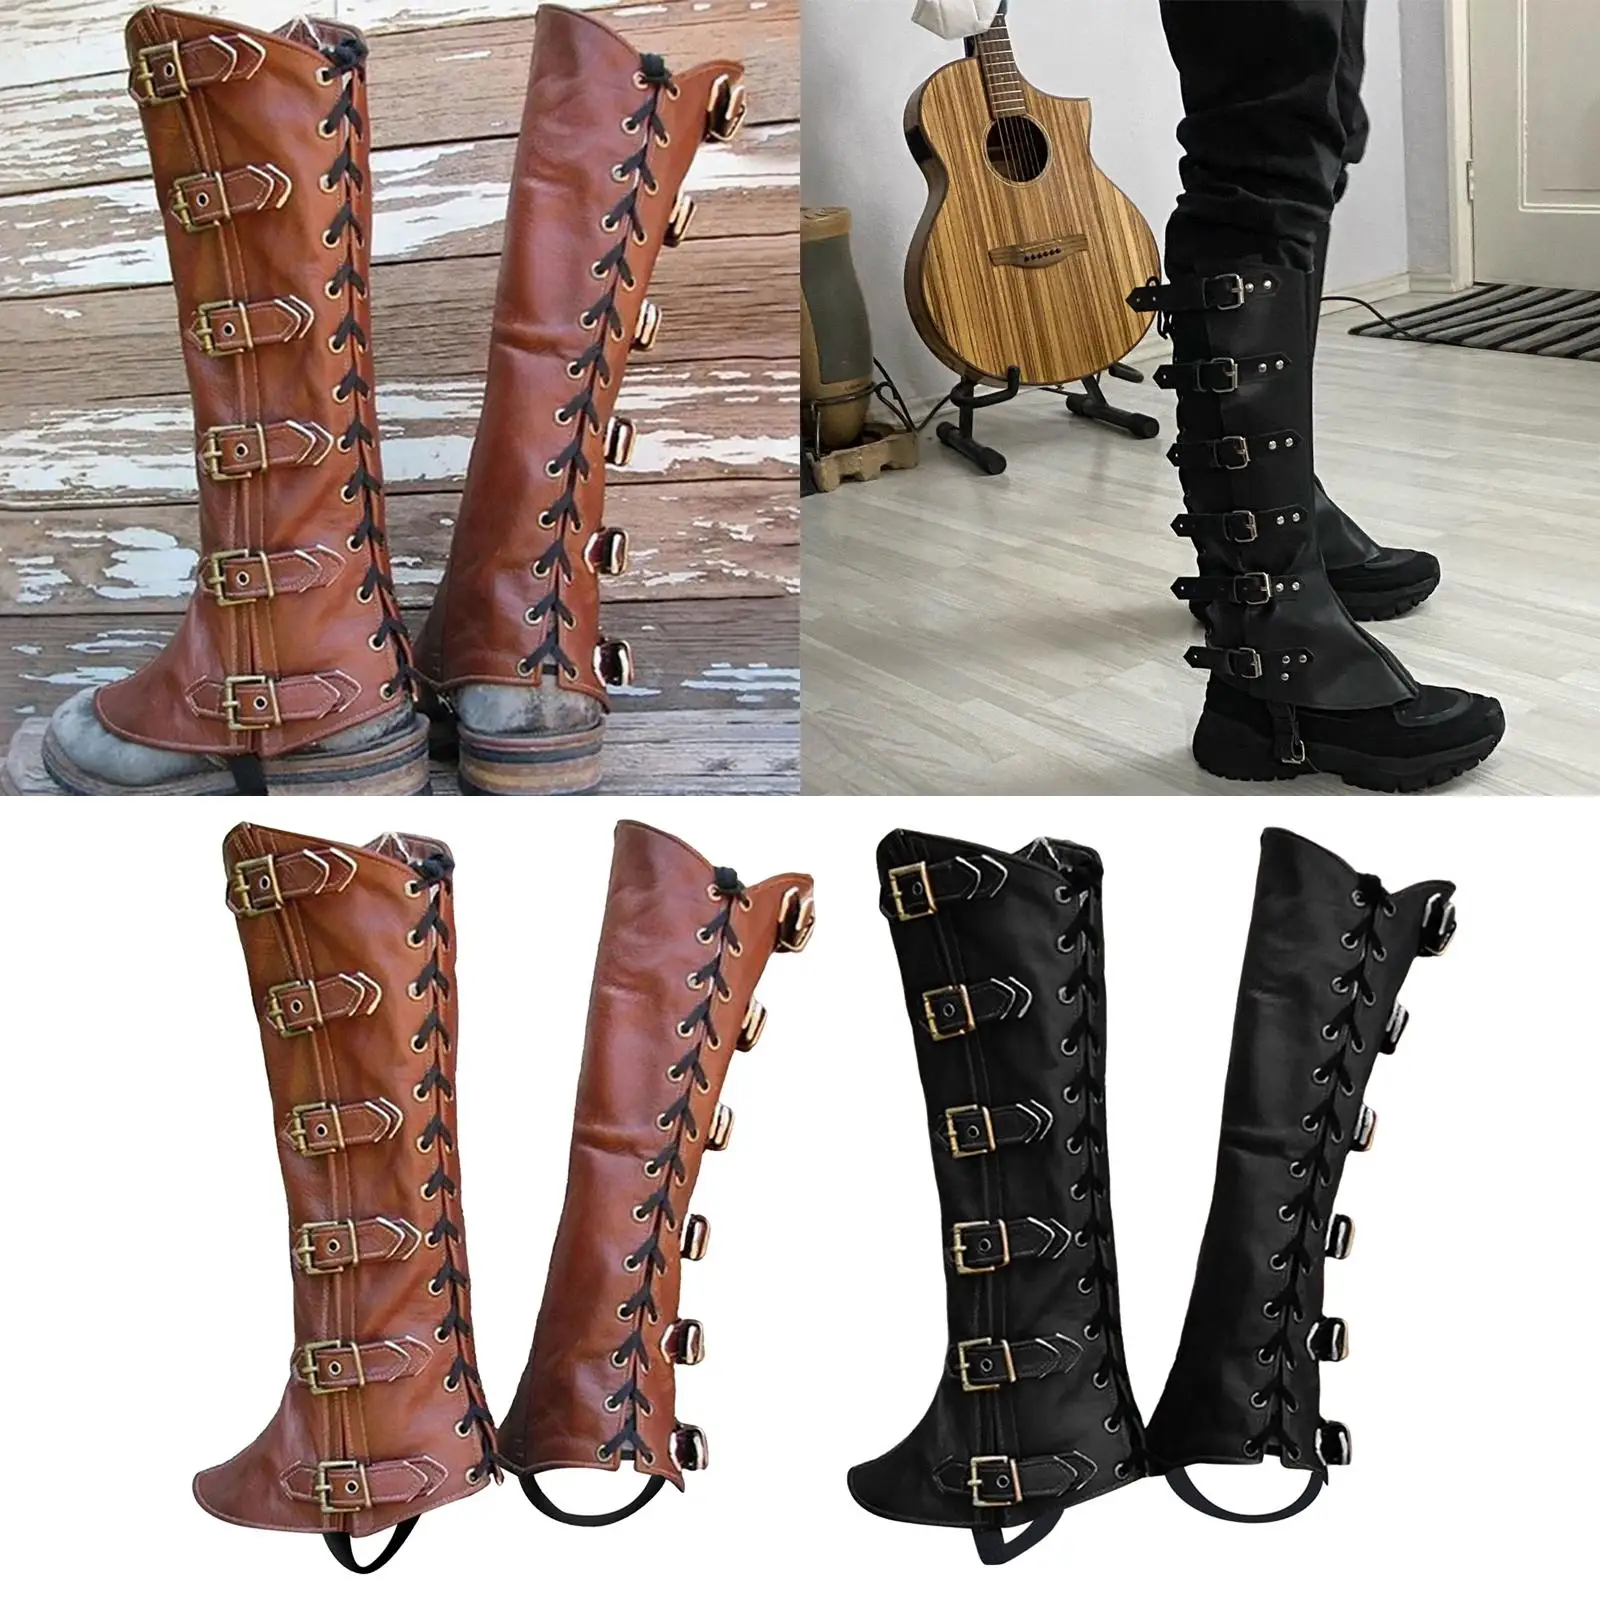 PU Leg Guard Shoe Steampunk Warrior Medieval Gothic Shoe Cover for Masquerade Knights Costume Accessory Cosplay Props Women Men